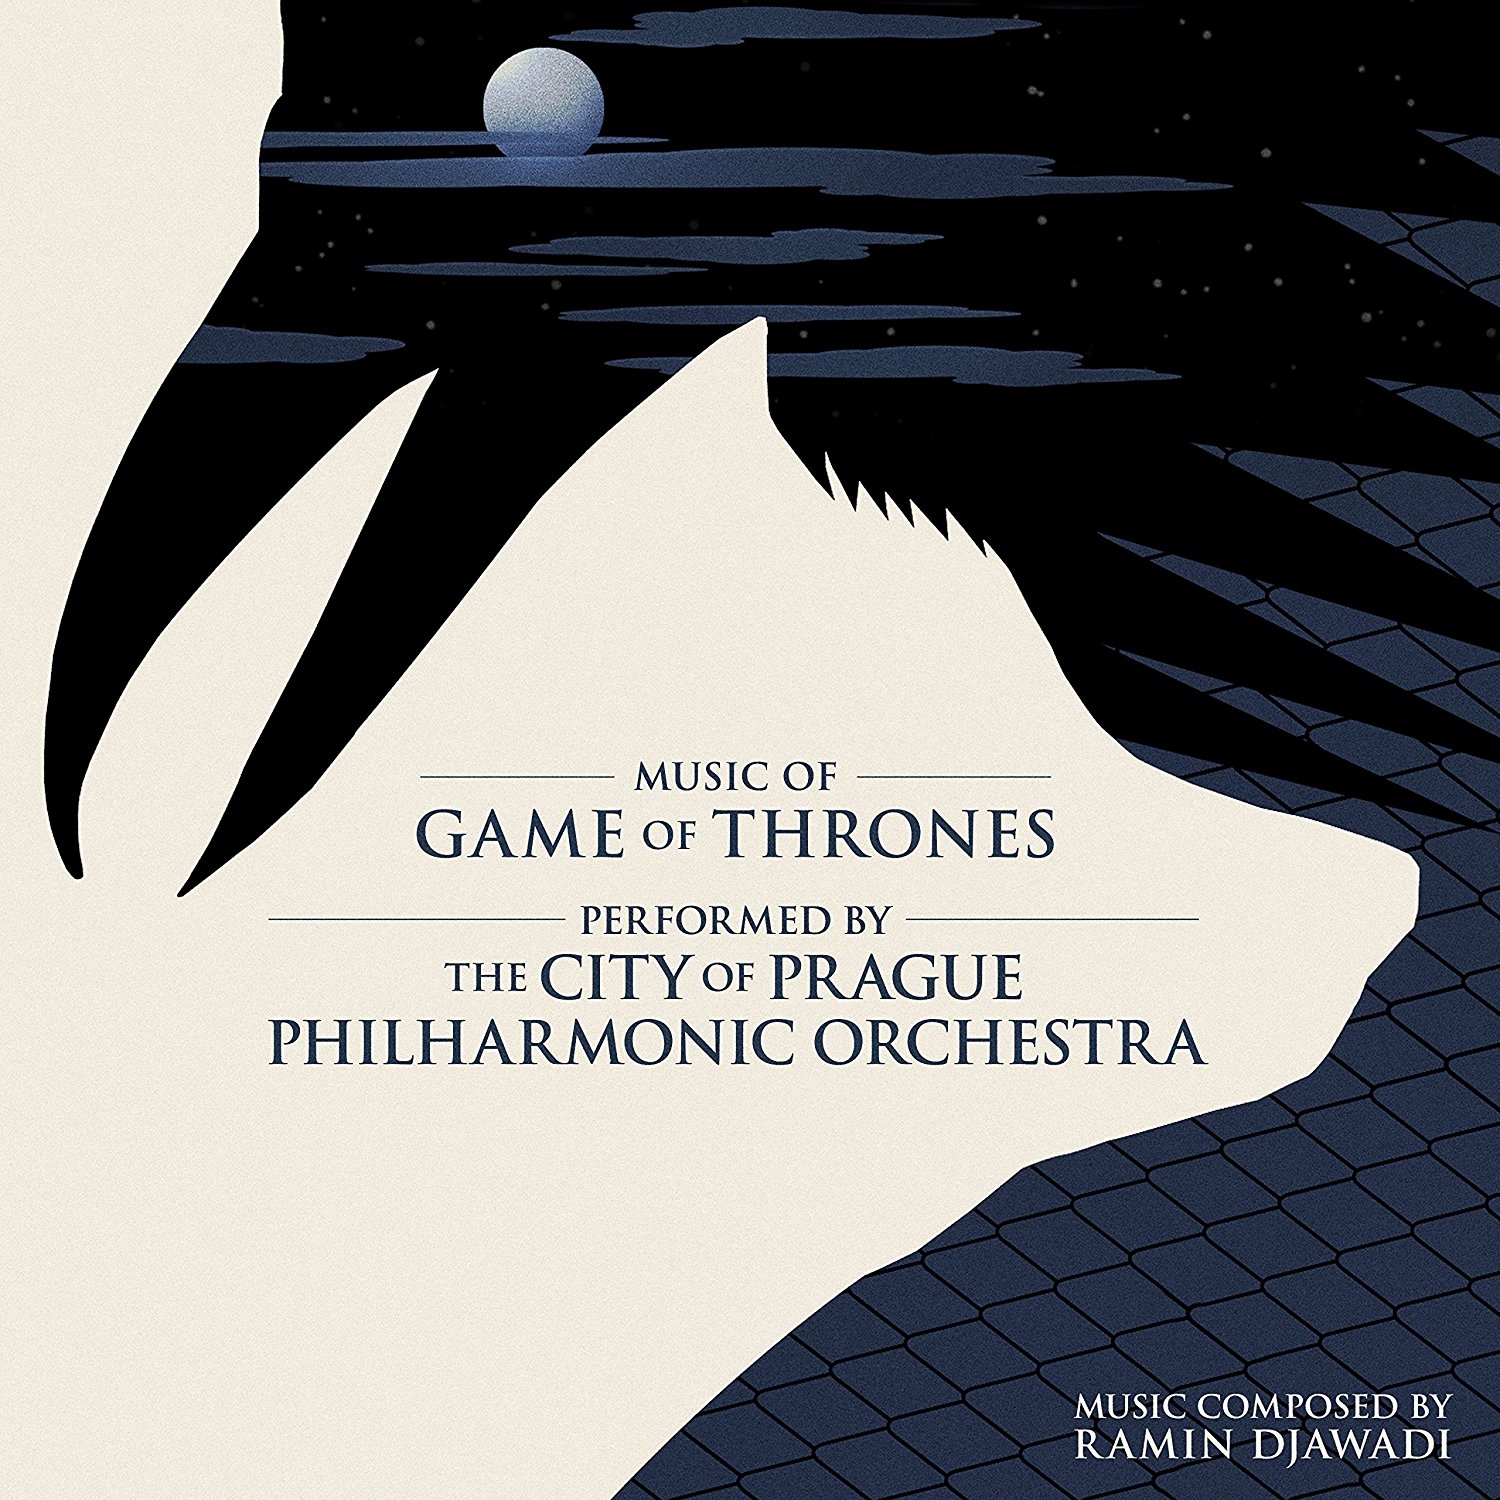 The City of Prague Philharmonic Orchestra - The Game of Thrones Symphony